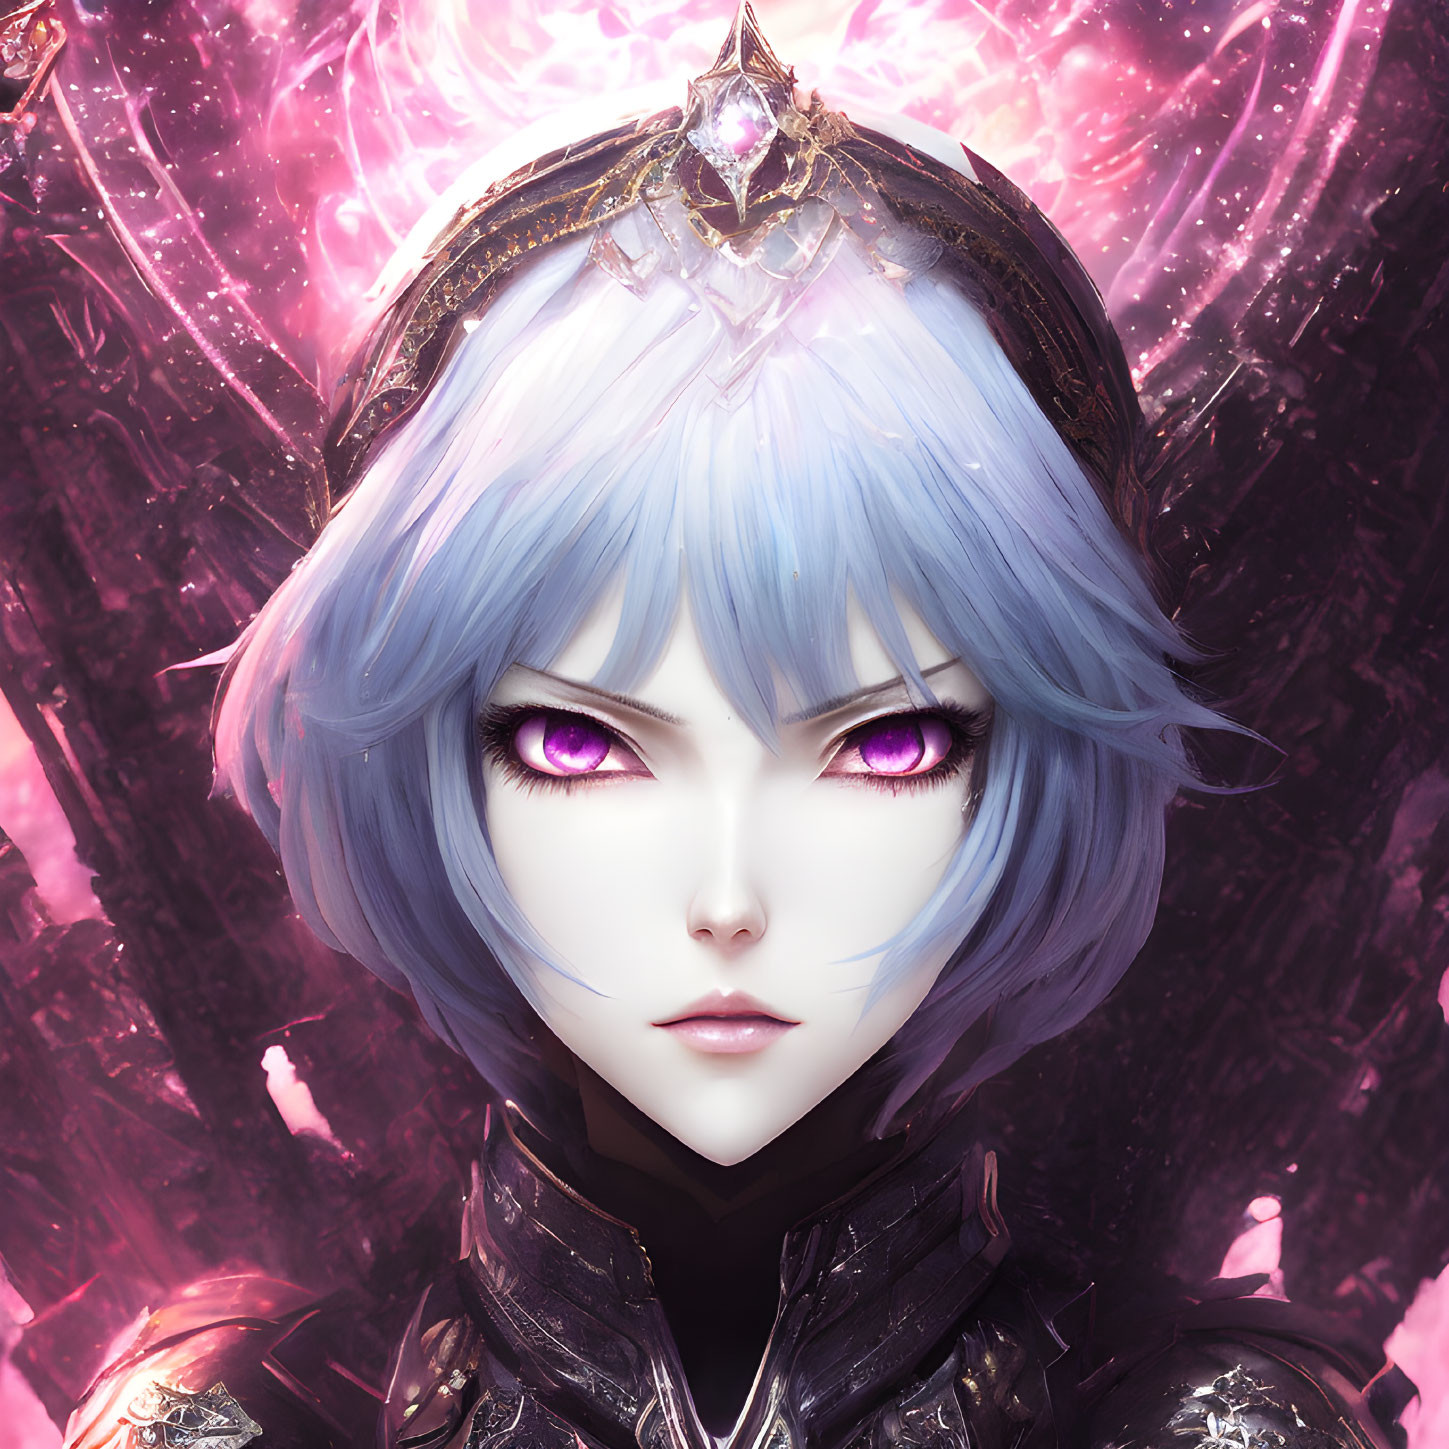 Fantasy character with pale skin, purple eyes, blue hair, ornate black armor, and crown